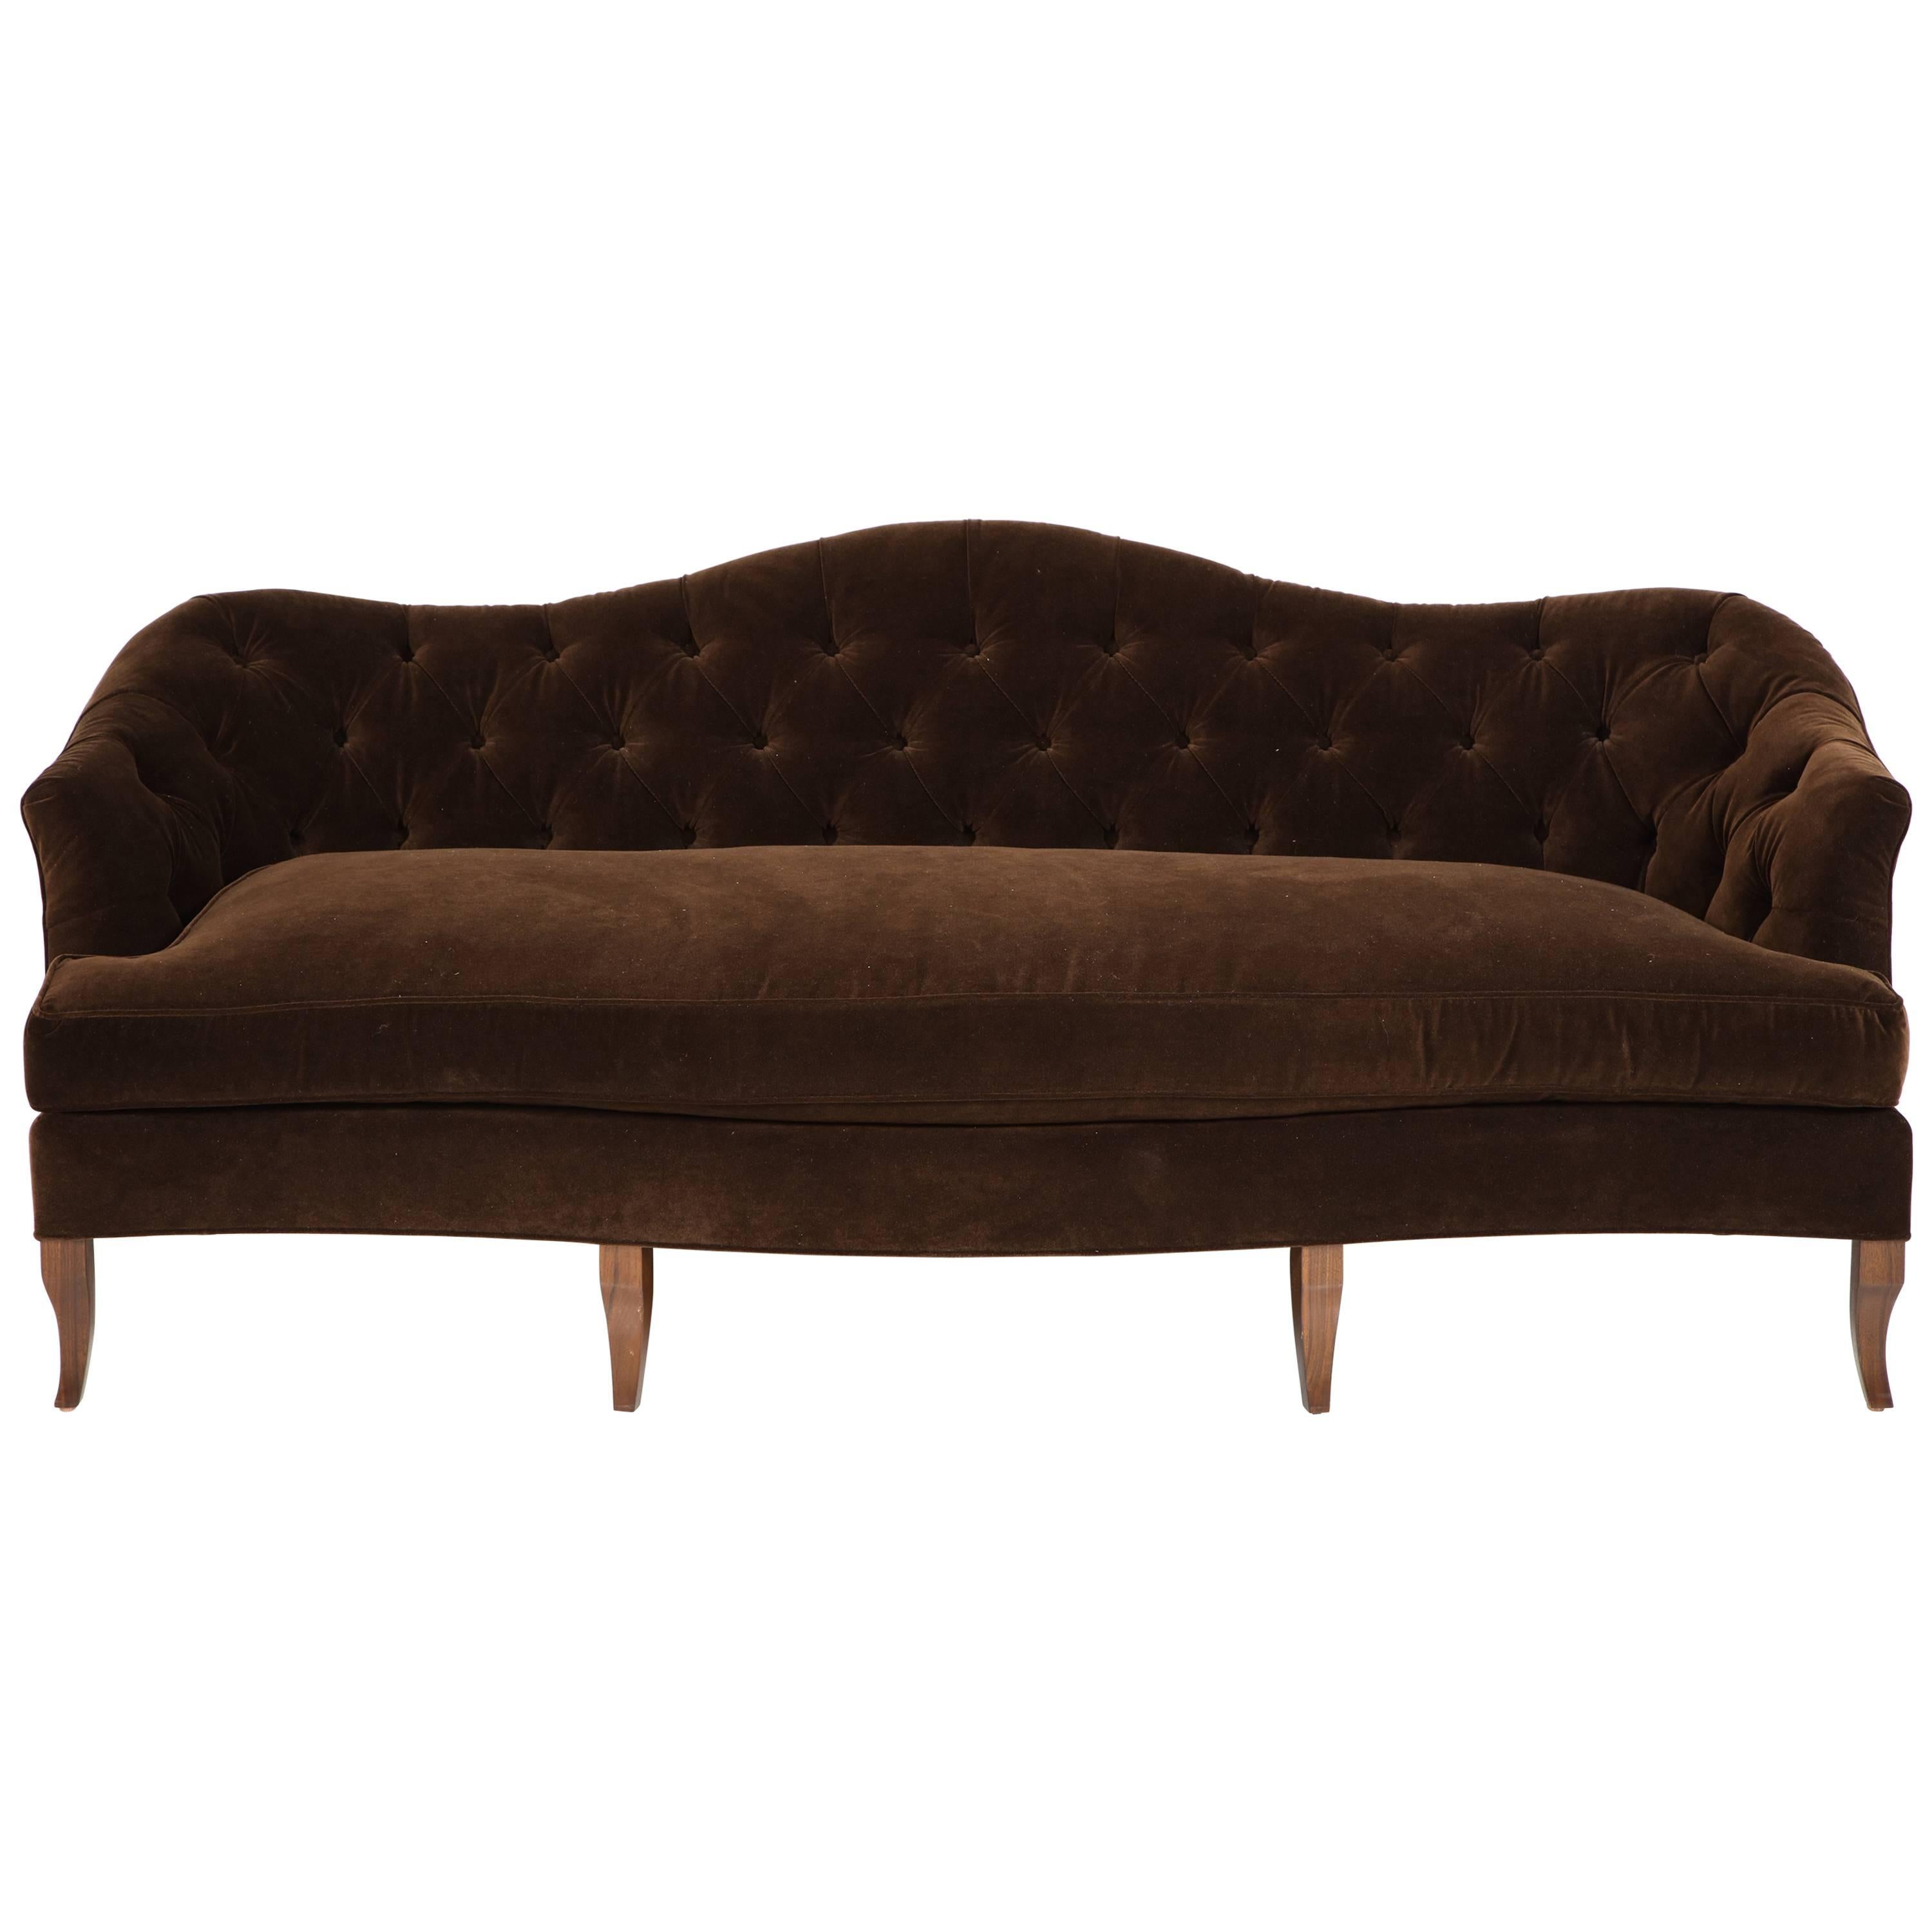 NK Collection Tufted Sofa Upholstered in Brown Velvet